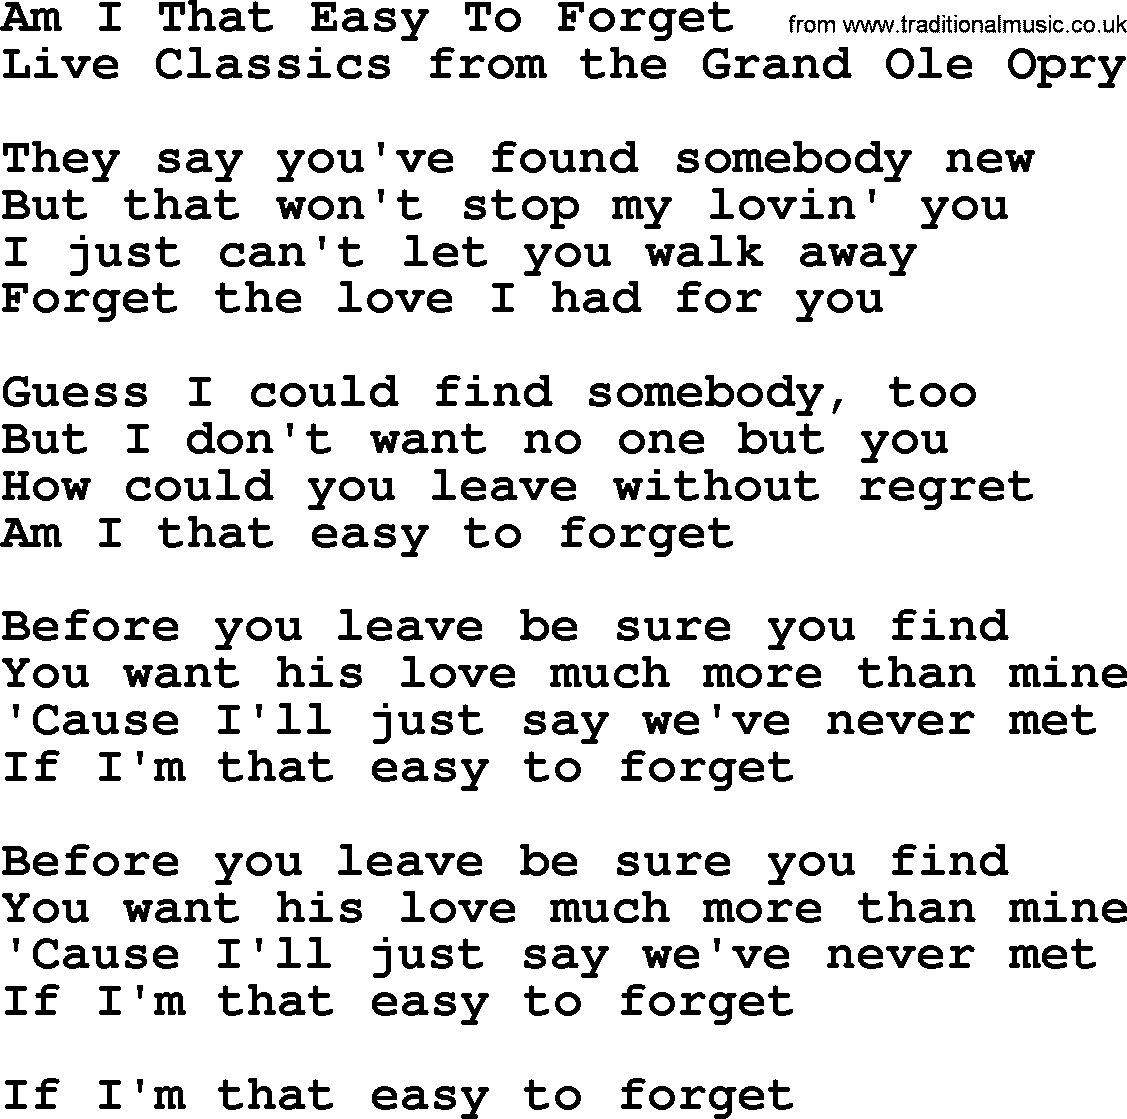 Marty Robbins song: Am I That Easy To Forget, lyrics